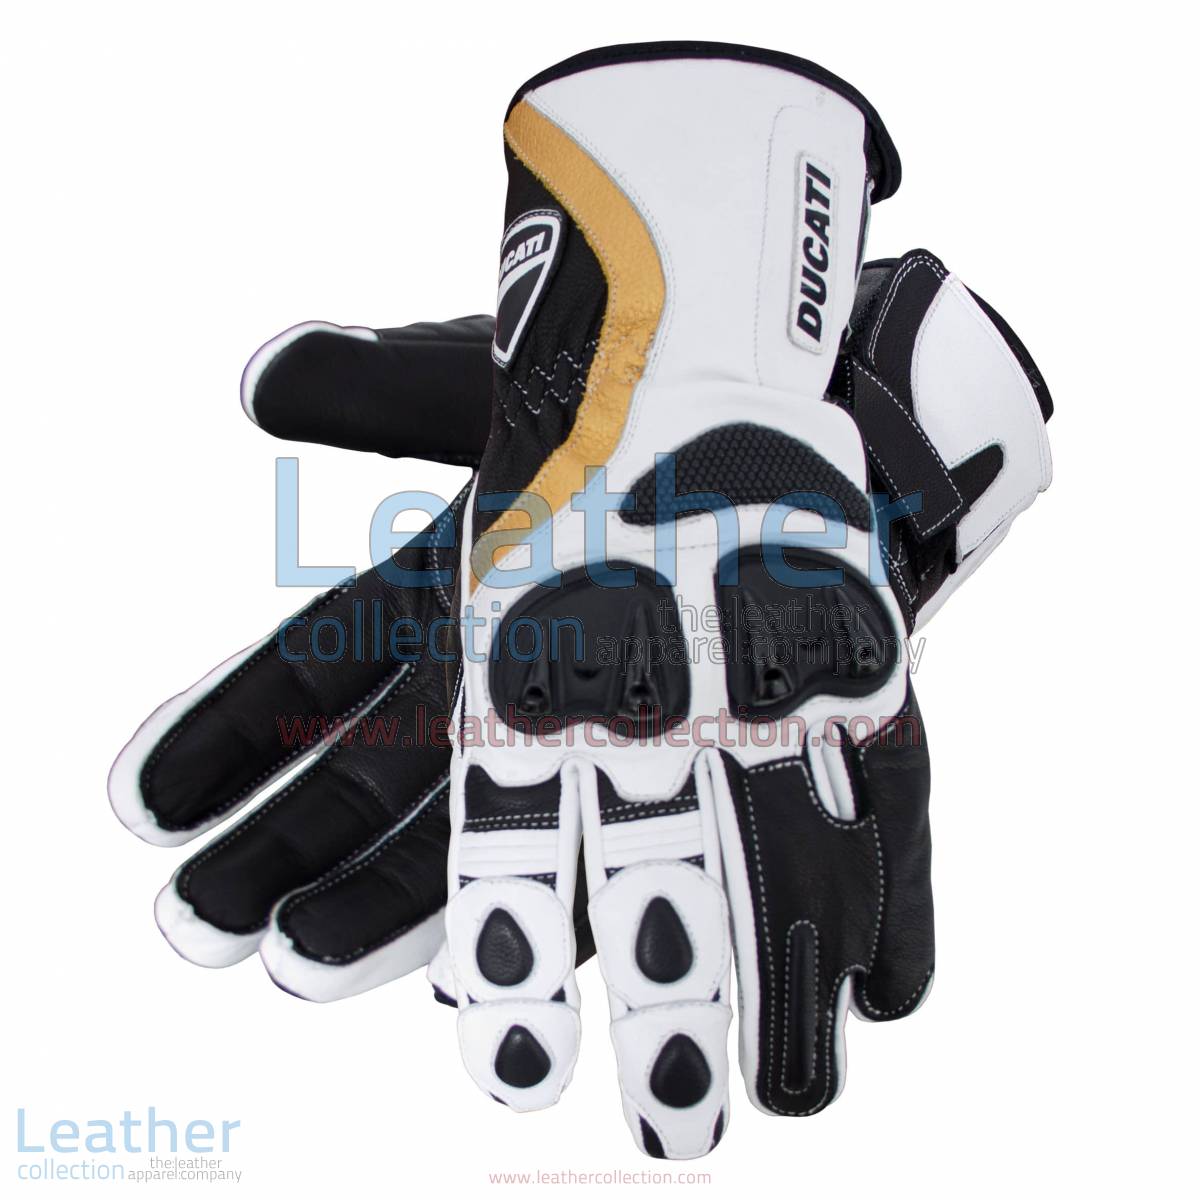 Ducati Motorcycle Leather Gloves | motorcycle gloves,Ducati motorcycle gloves